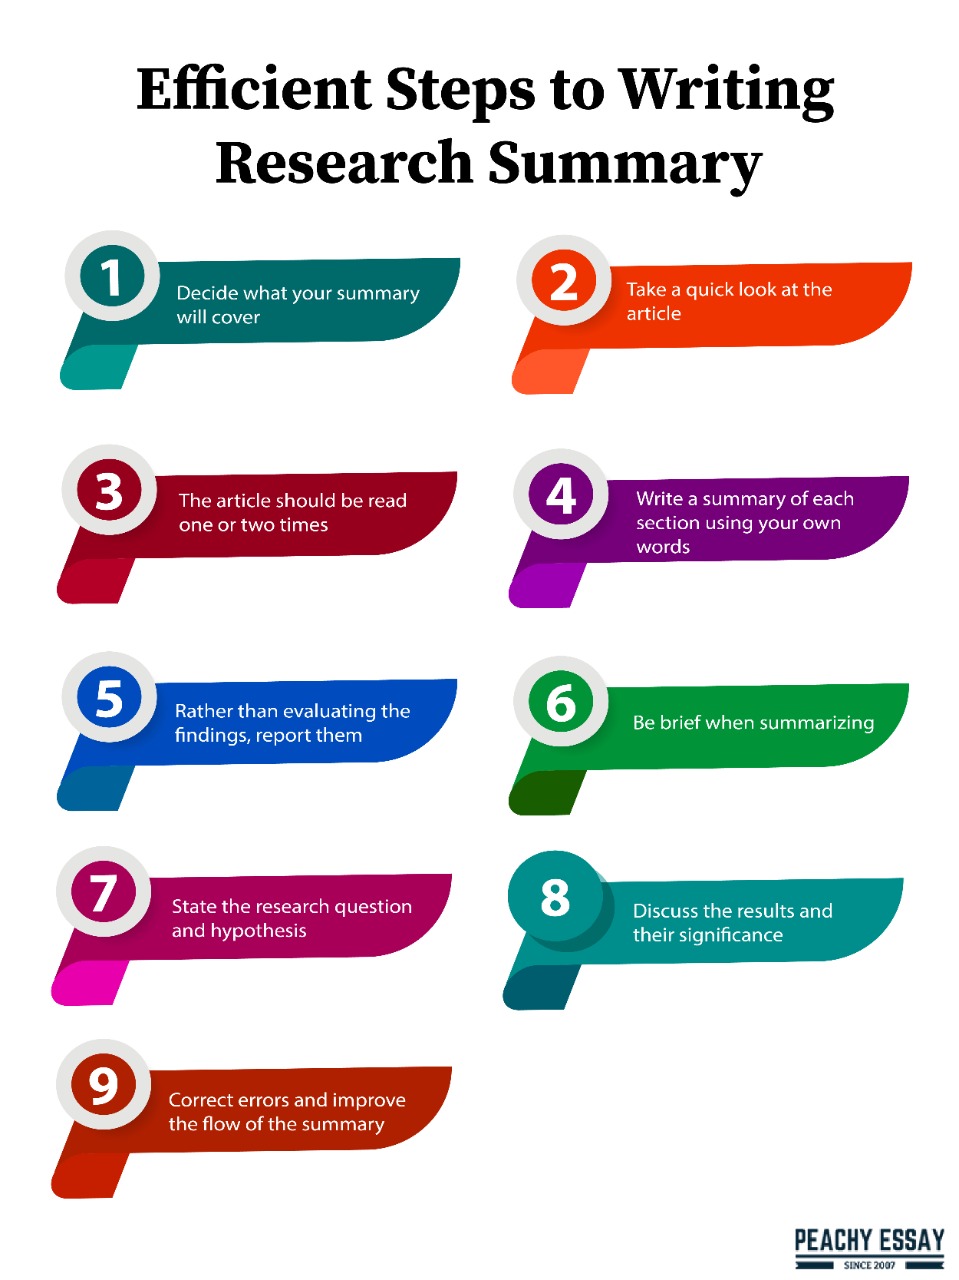 research summary meaning